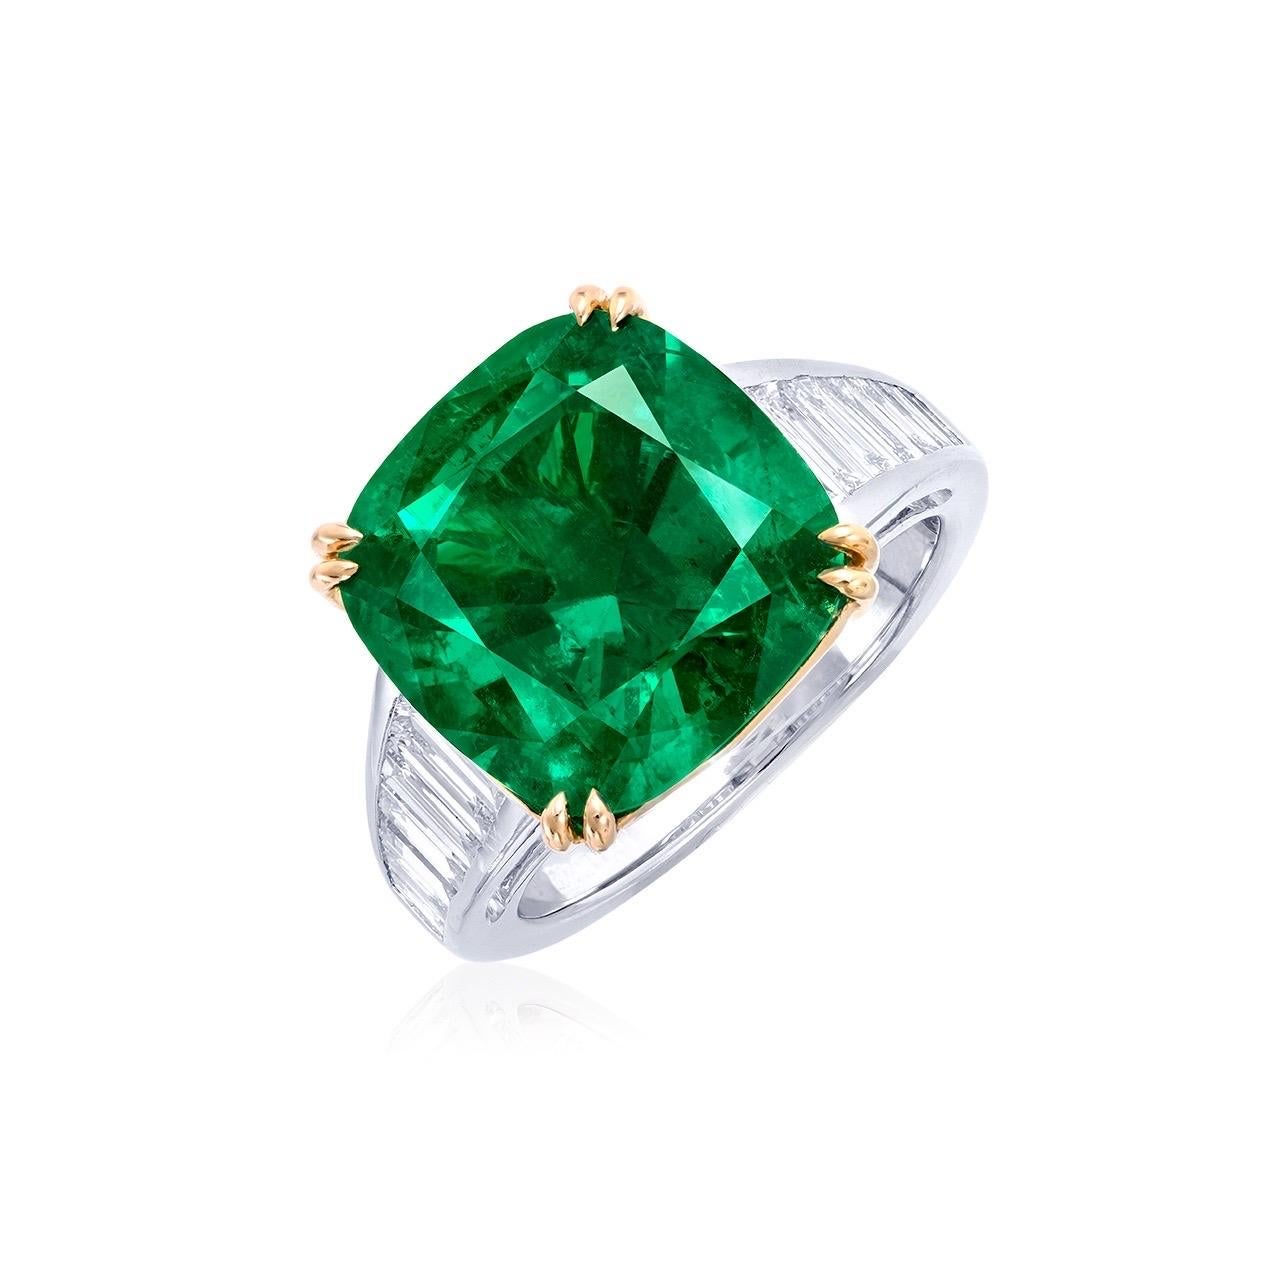 Main stone: 8.32 carats GREEN SQUARE CUSHION
Matching setting: 14 white diamonds, a total of about 0.98 carats, 18K
From the Museum Vault At Emilio Jewelry, Located on New York's iconic Fifth Avenue,

The focal point of this ring is the 8.32 Carat